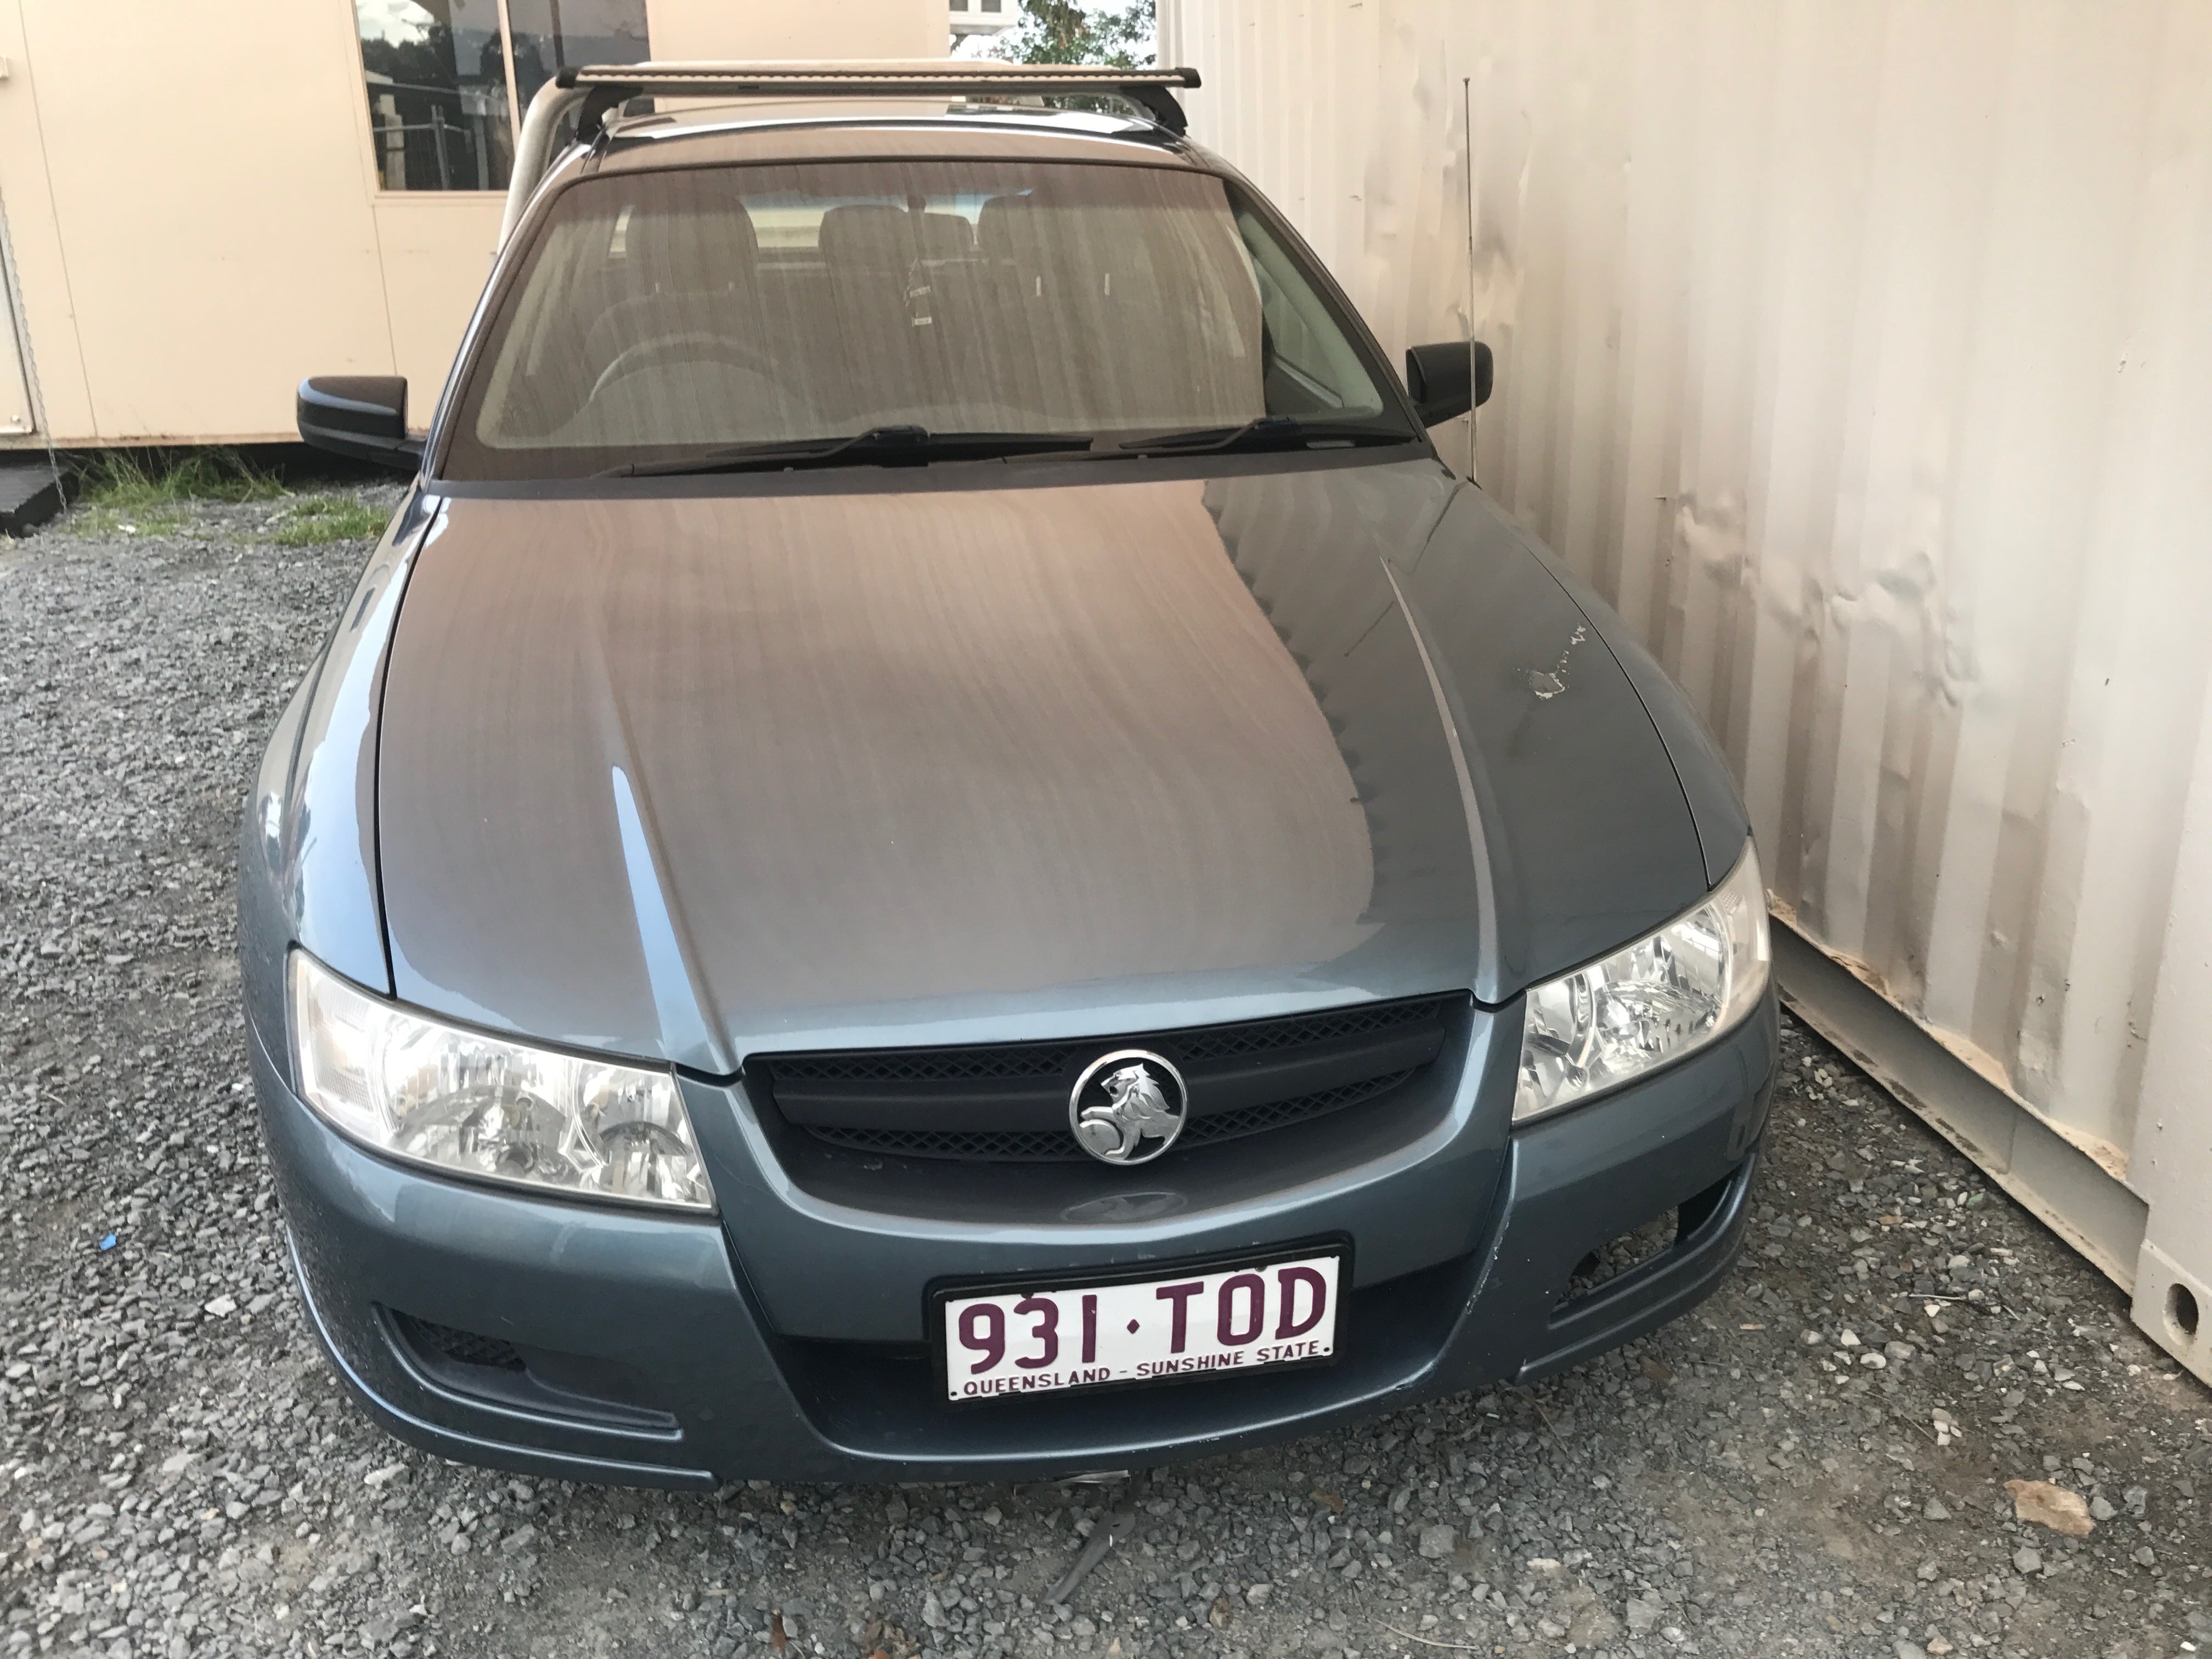 manual holden crewman for sale